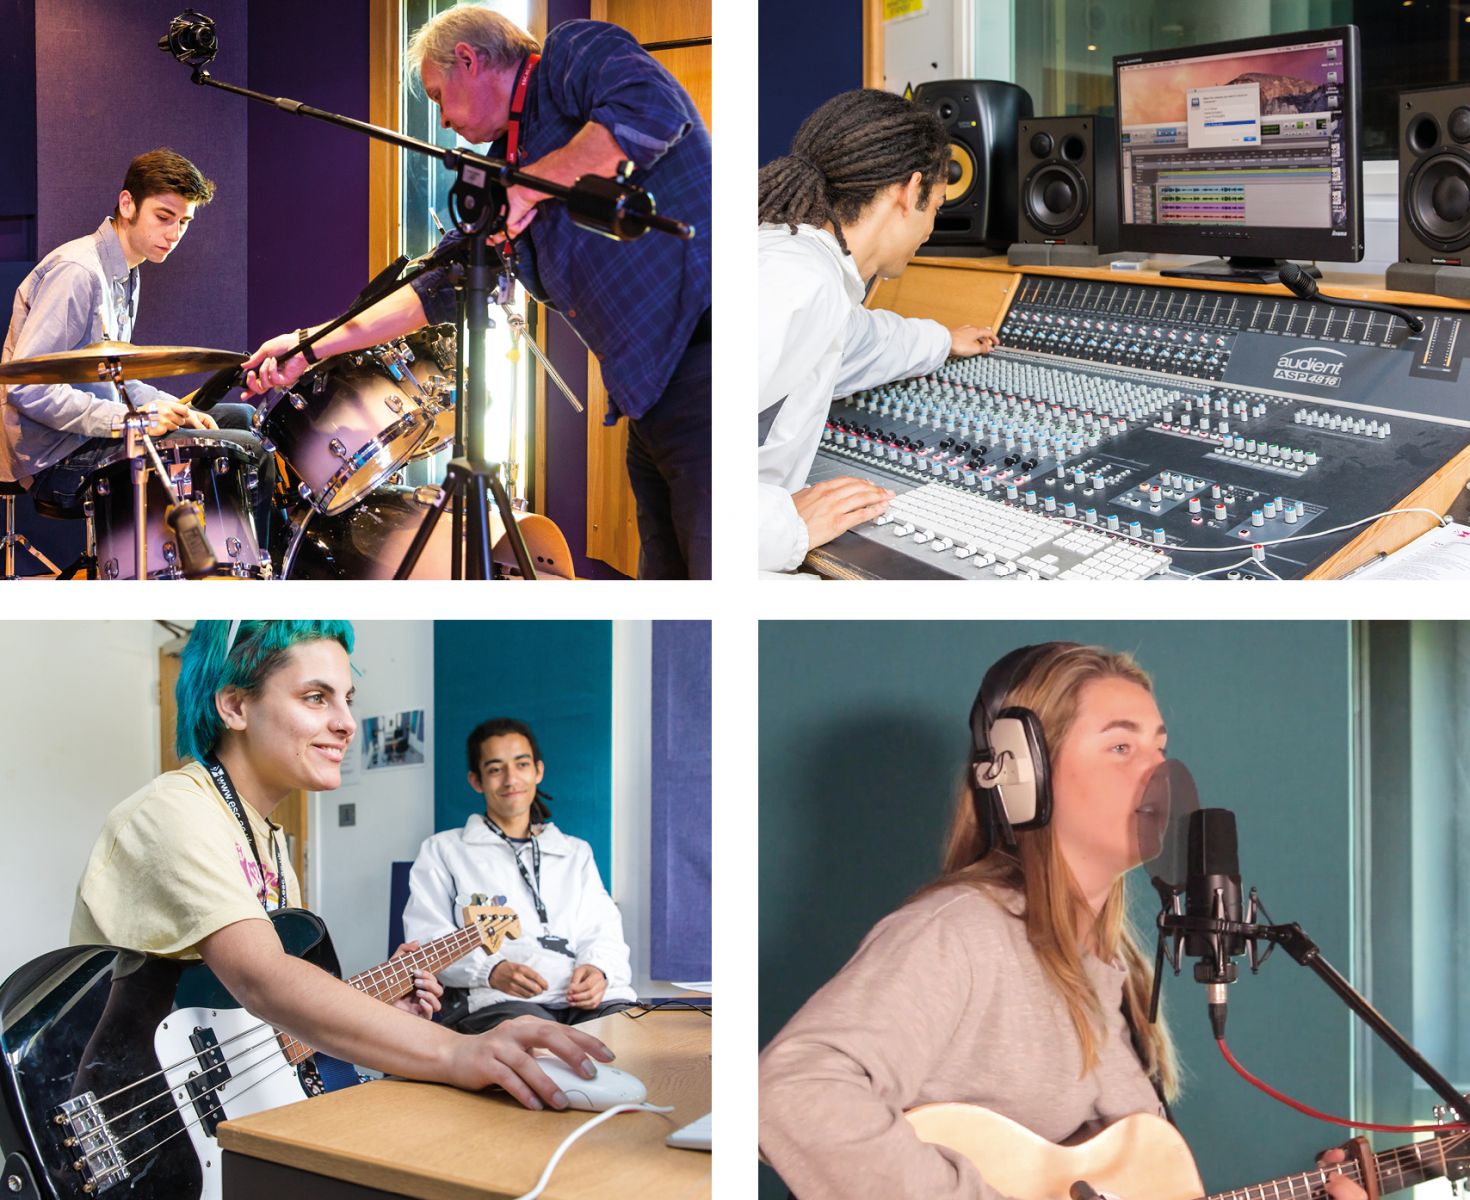 Four images of students in recording and production studios